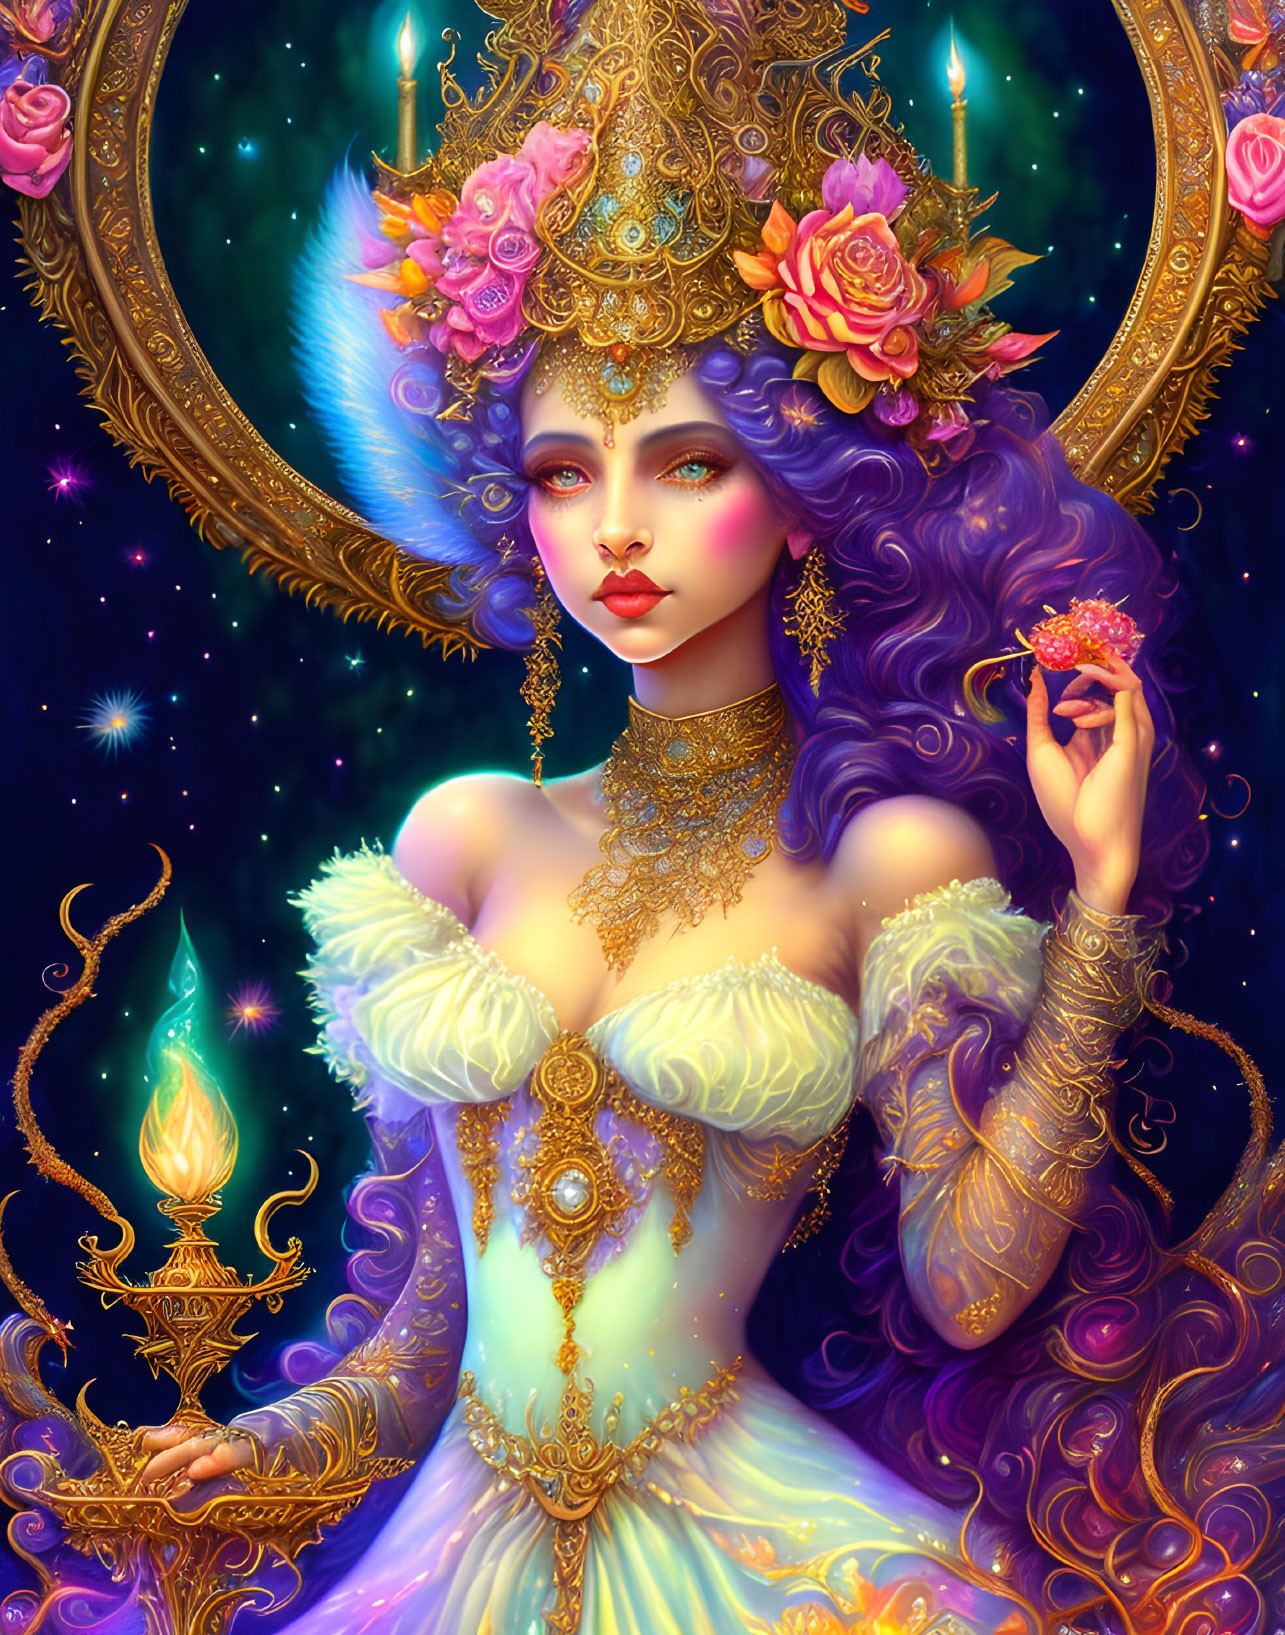 Fantastical illustration of woman with purple hair and cosmic motifs